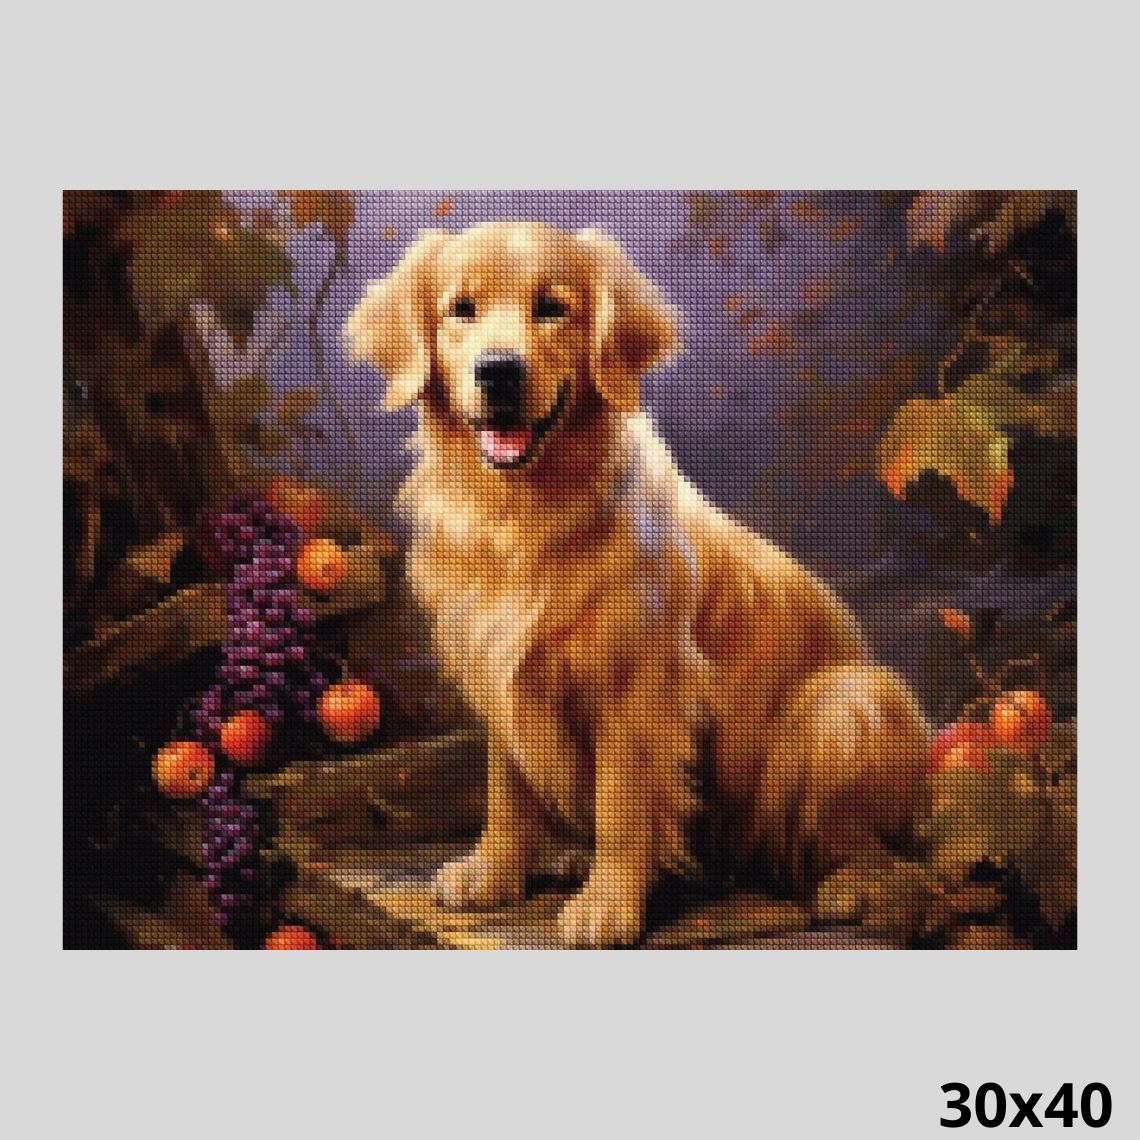 Dog and Fruits - 30x40cm (12x16in) / Square